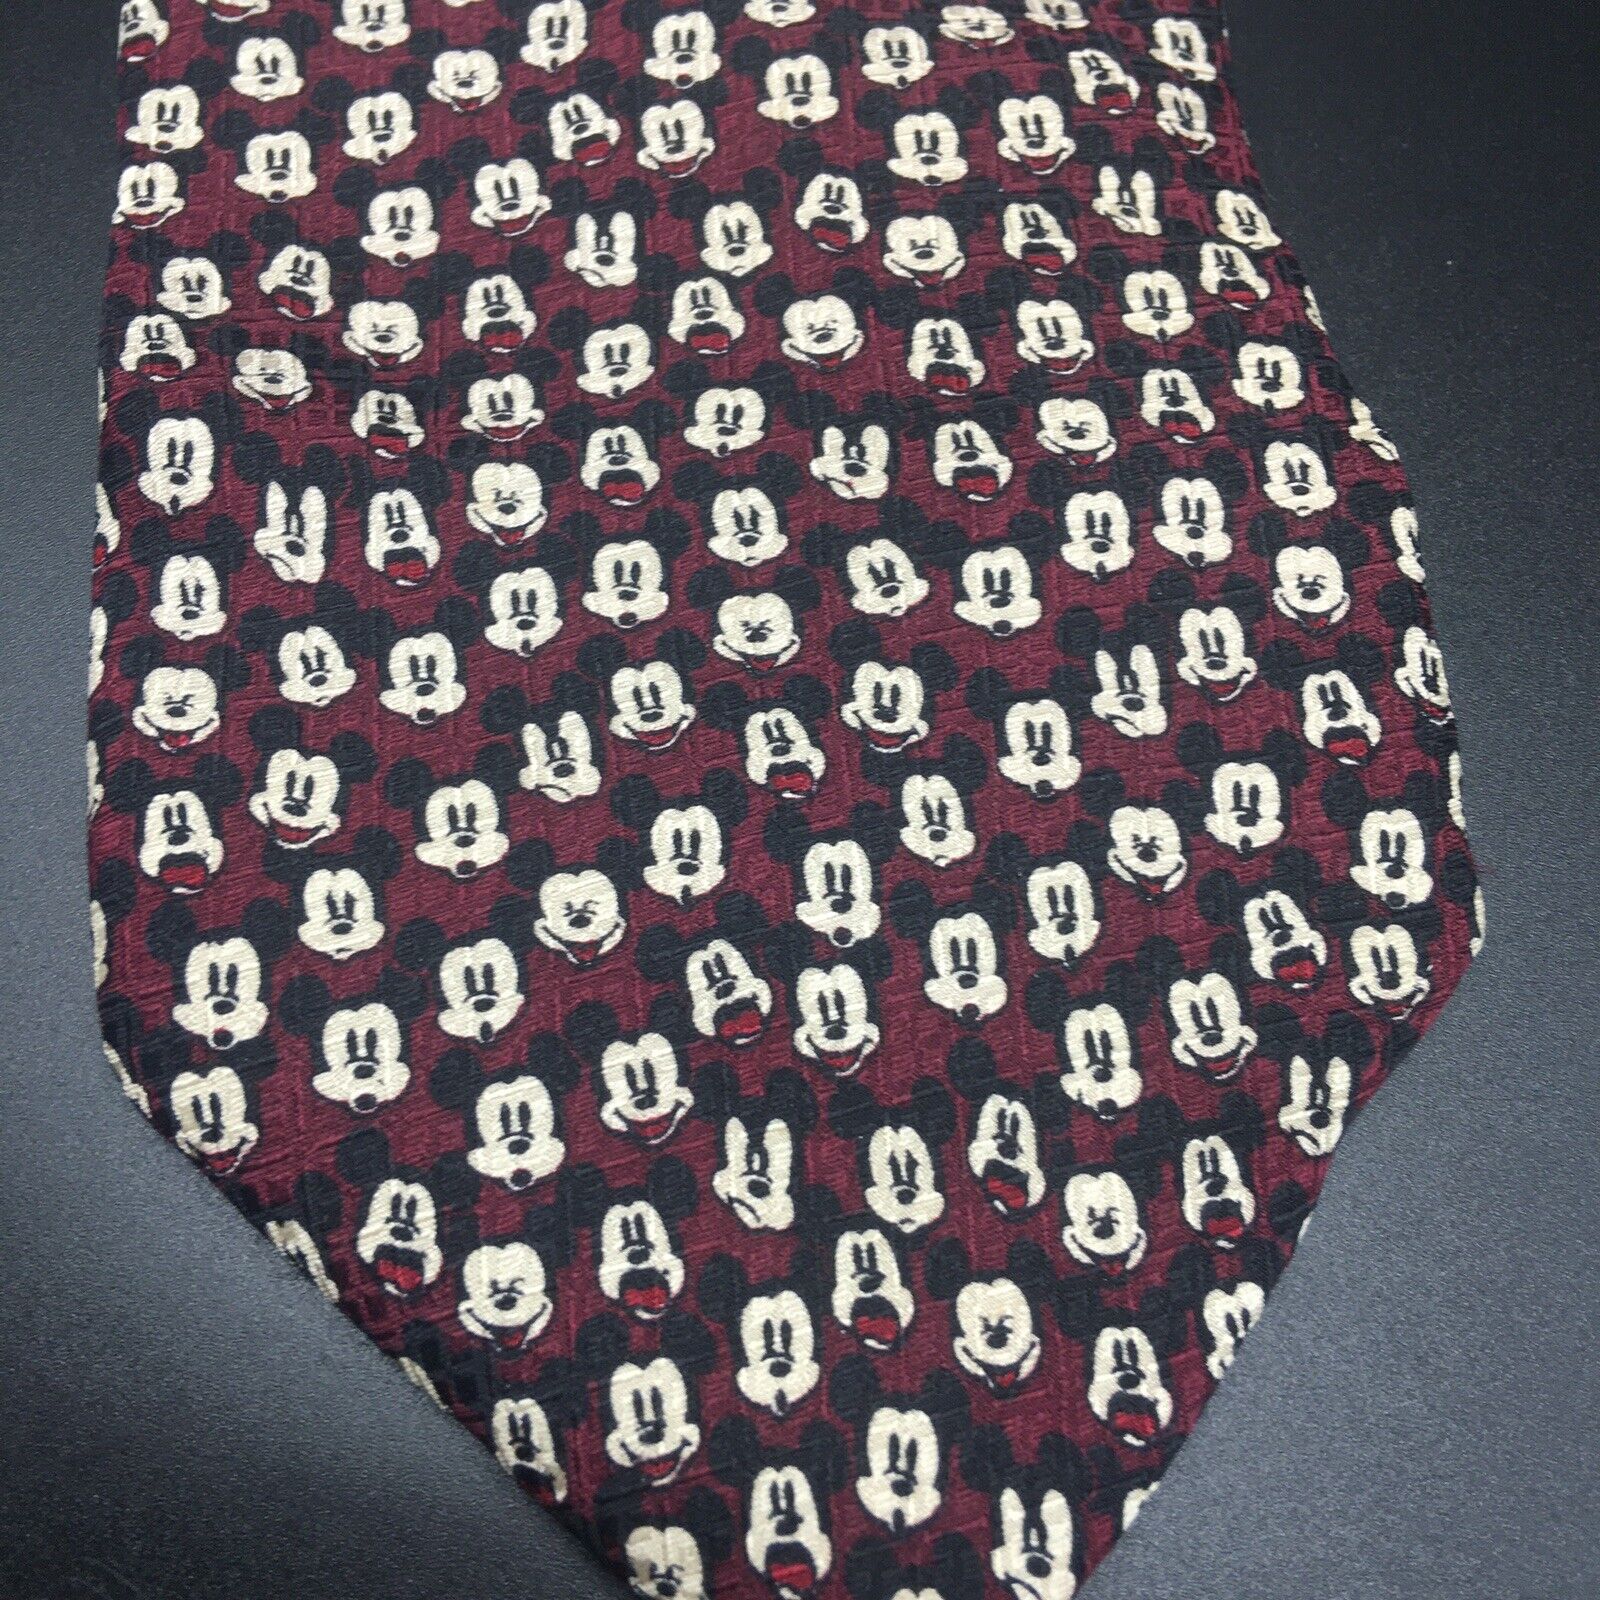 The Disney Store Mickey Mouse Thousand Faces Burgundy Neck Tie 4” 100% Silk